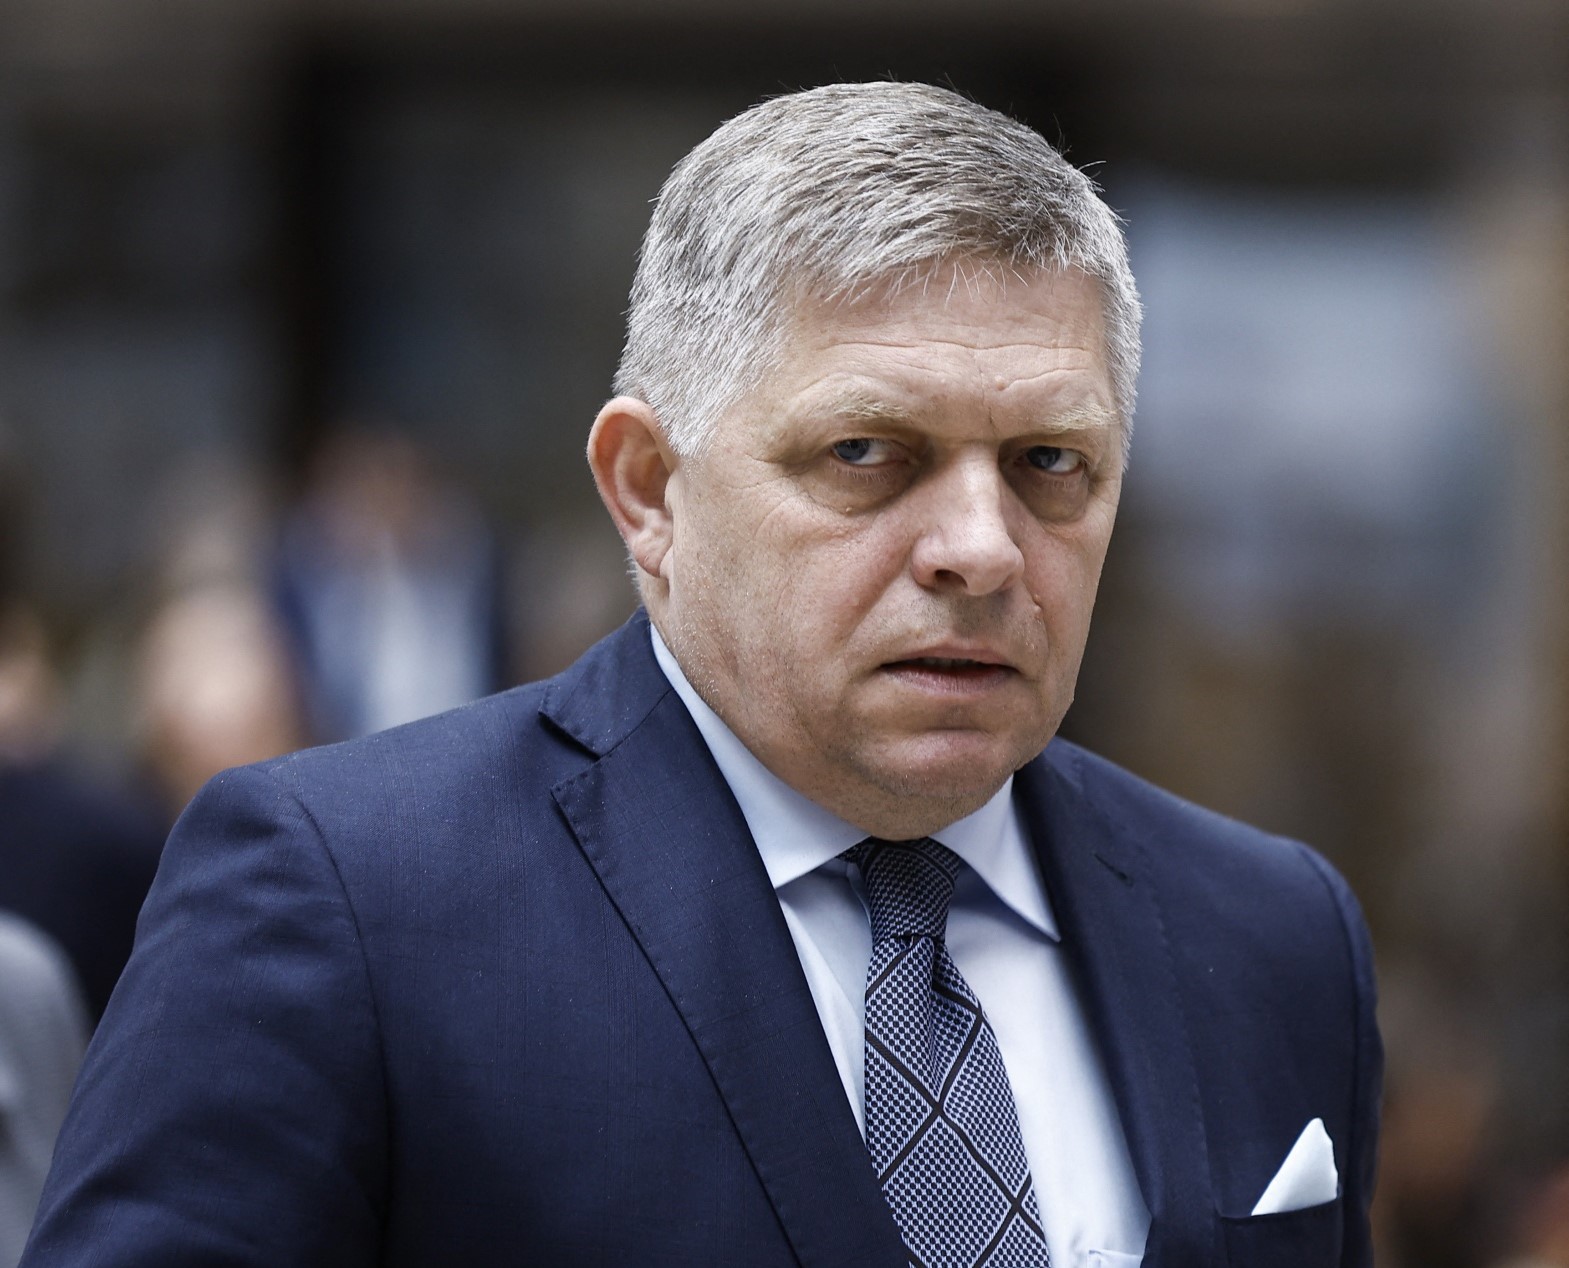 Just In: Assassin shots Slovakia Prime Minister, suffers ‘life-threatening wounds’